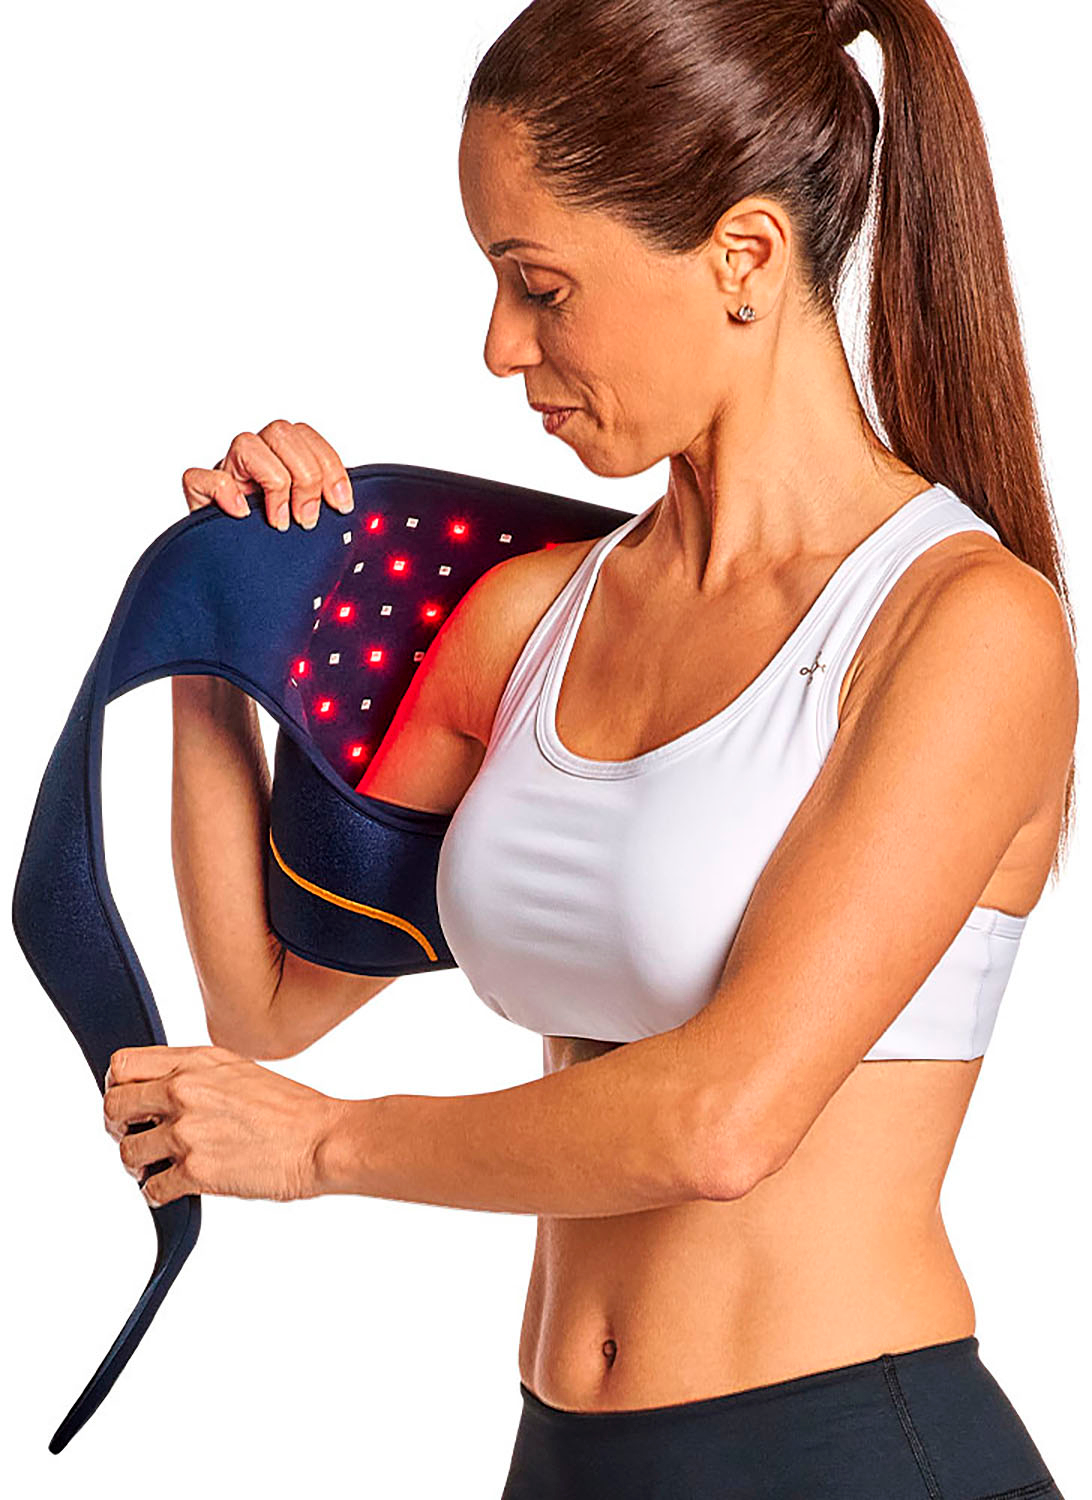 Left View: Tommie Copper - Infrared Light Therapy Shoulder Wrap - Dark Navy